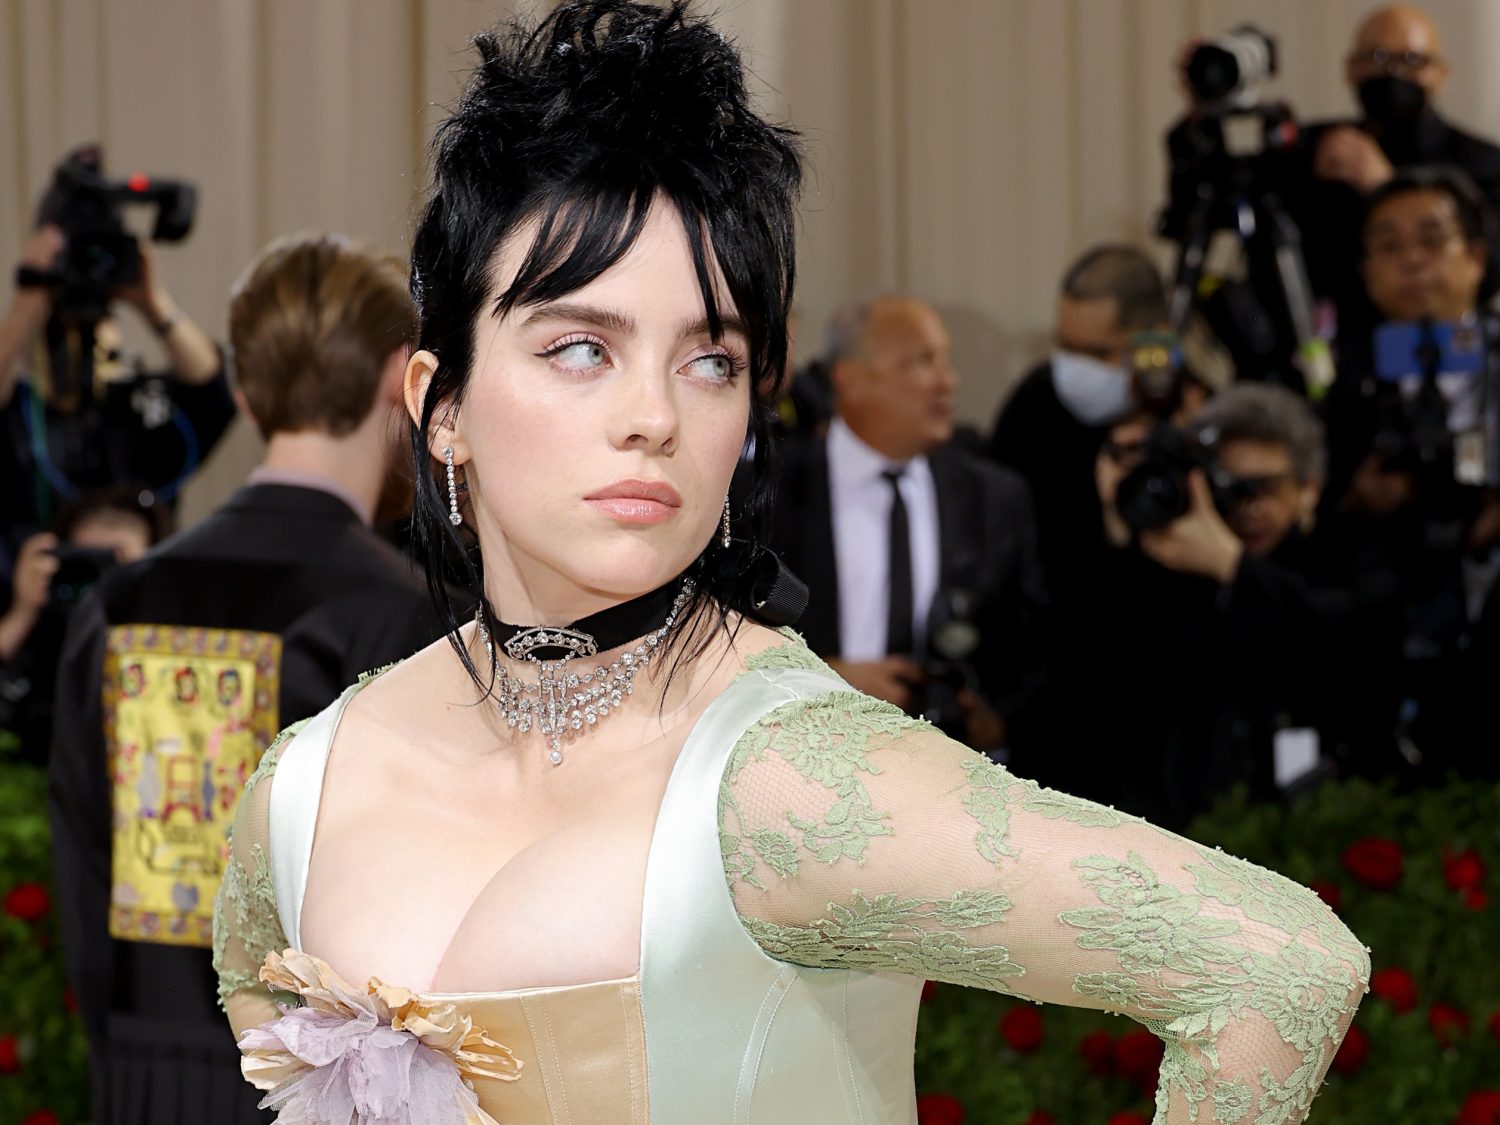 Billie Eilish Absolutely Ate The Girlies Up With Her Look At The 2022 Met Gala